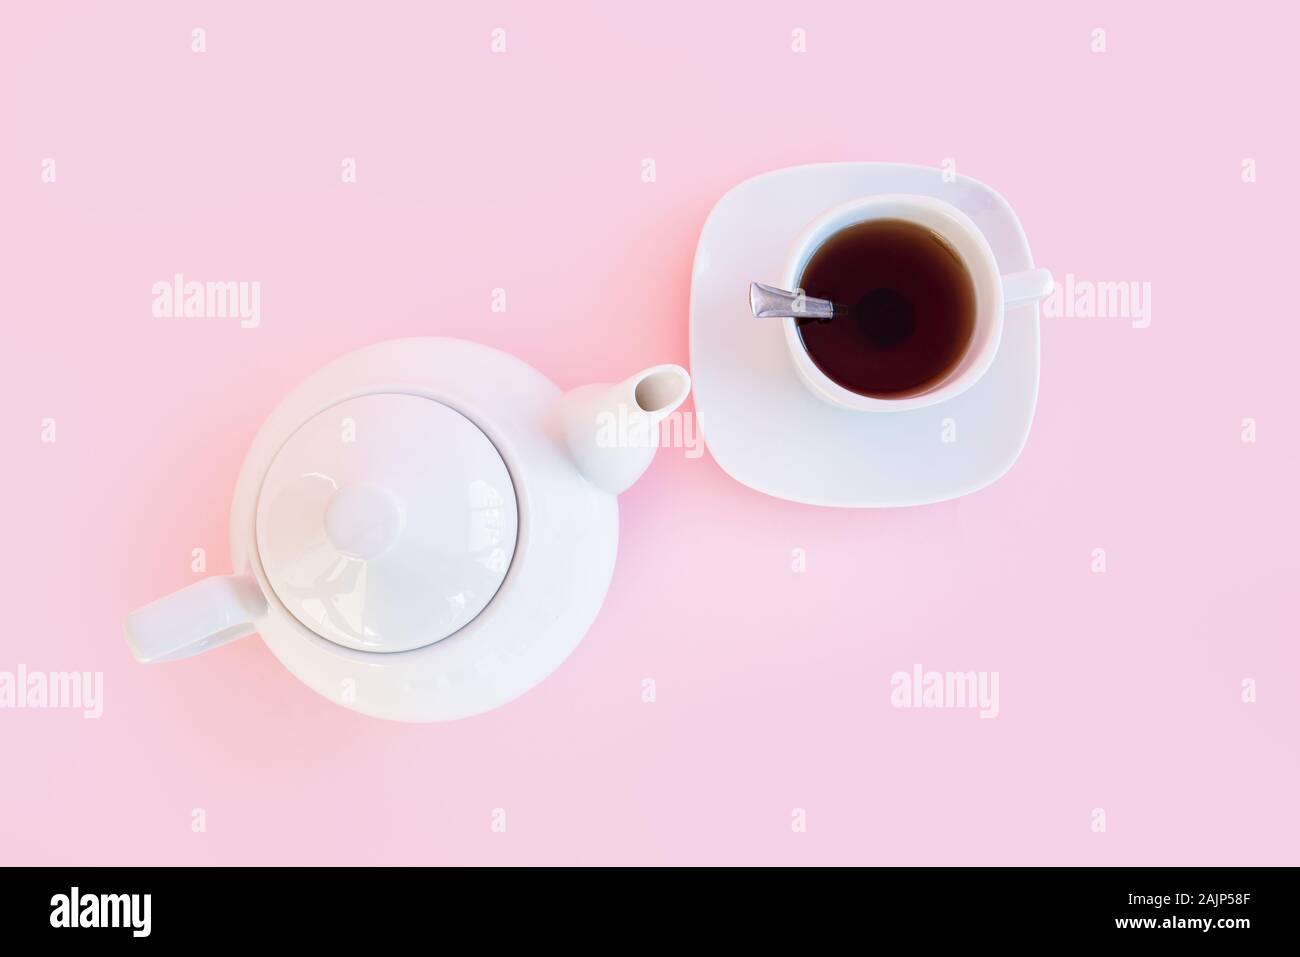 Tea time, brewing tea, cup of freshly brewed tea, warm soft and light, with pink background. Stock Photo